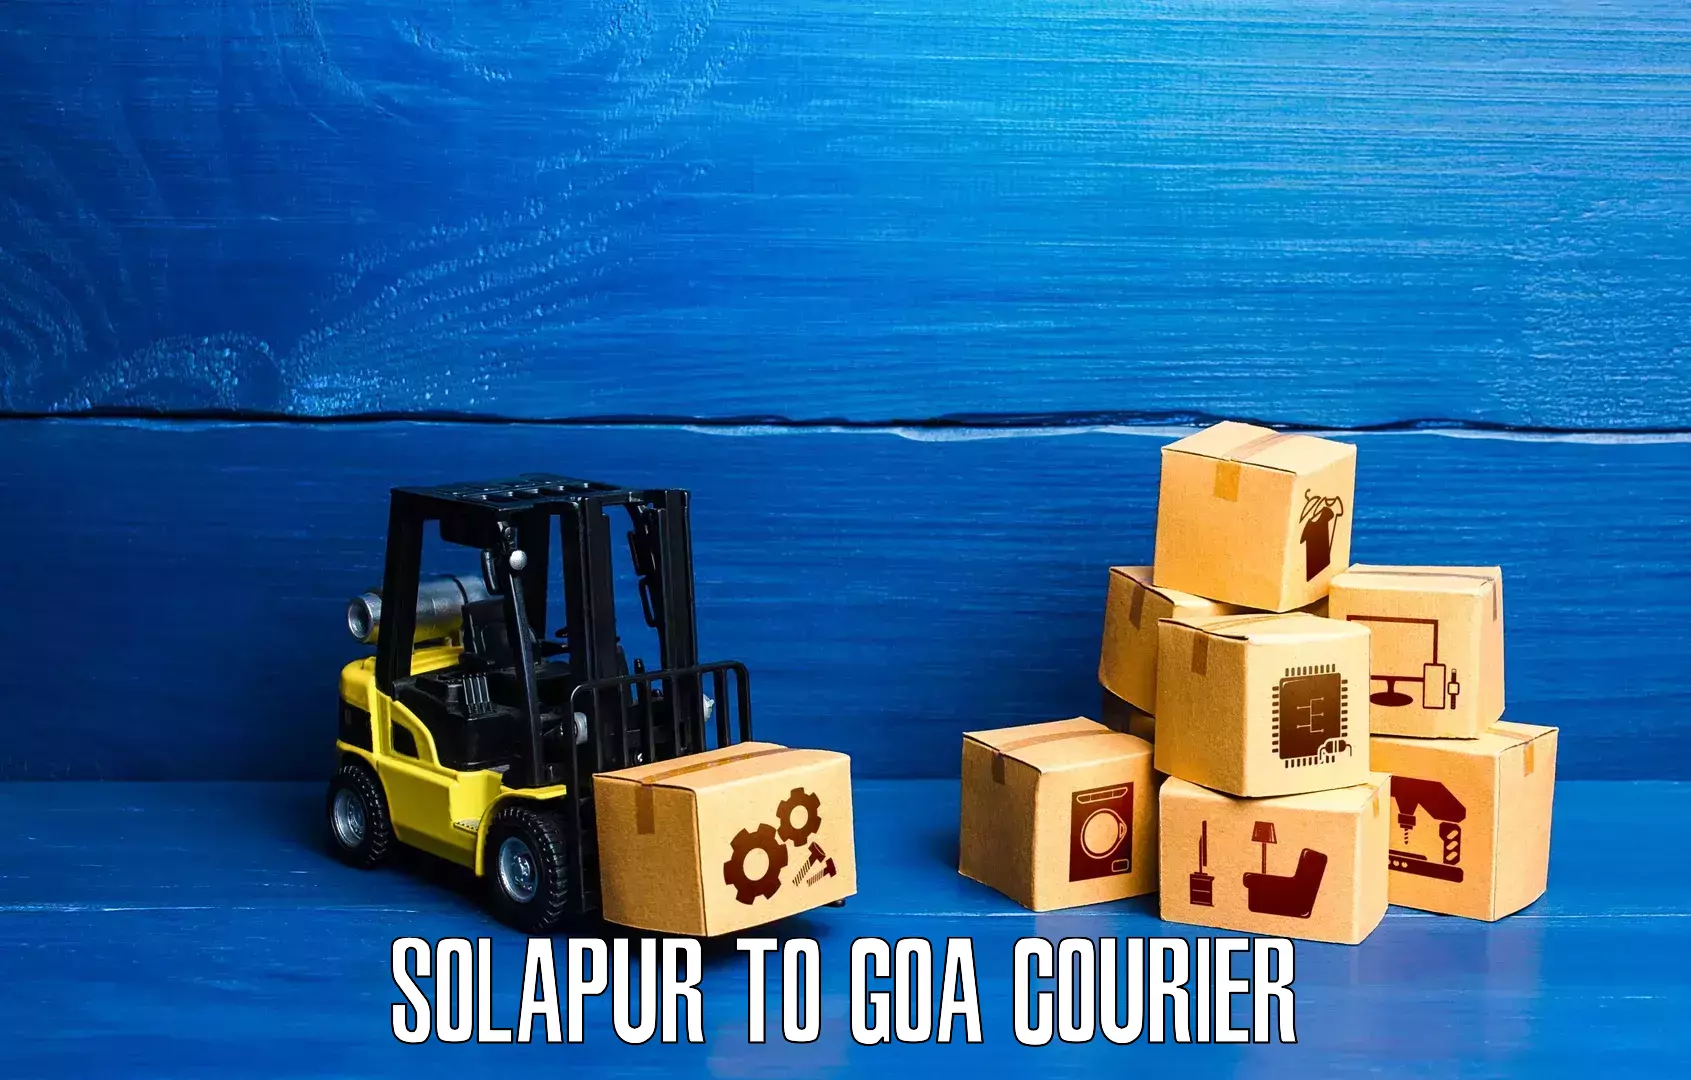 State-of-the-art courier technology Solapur to Margao